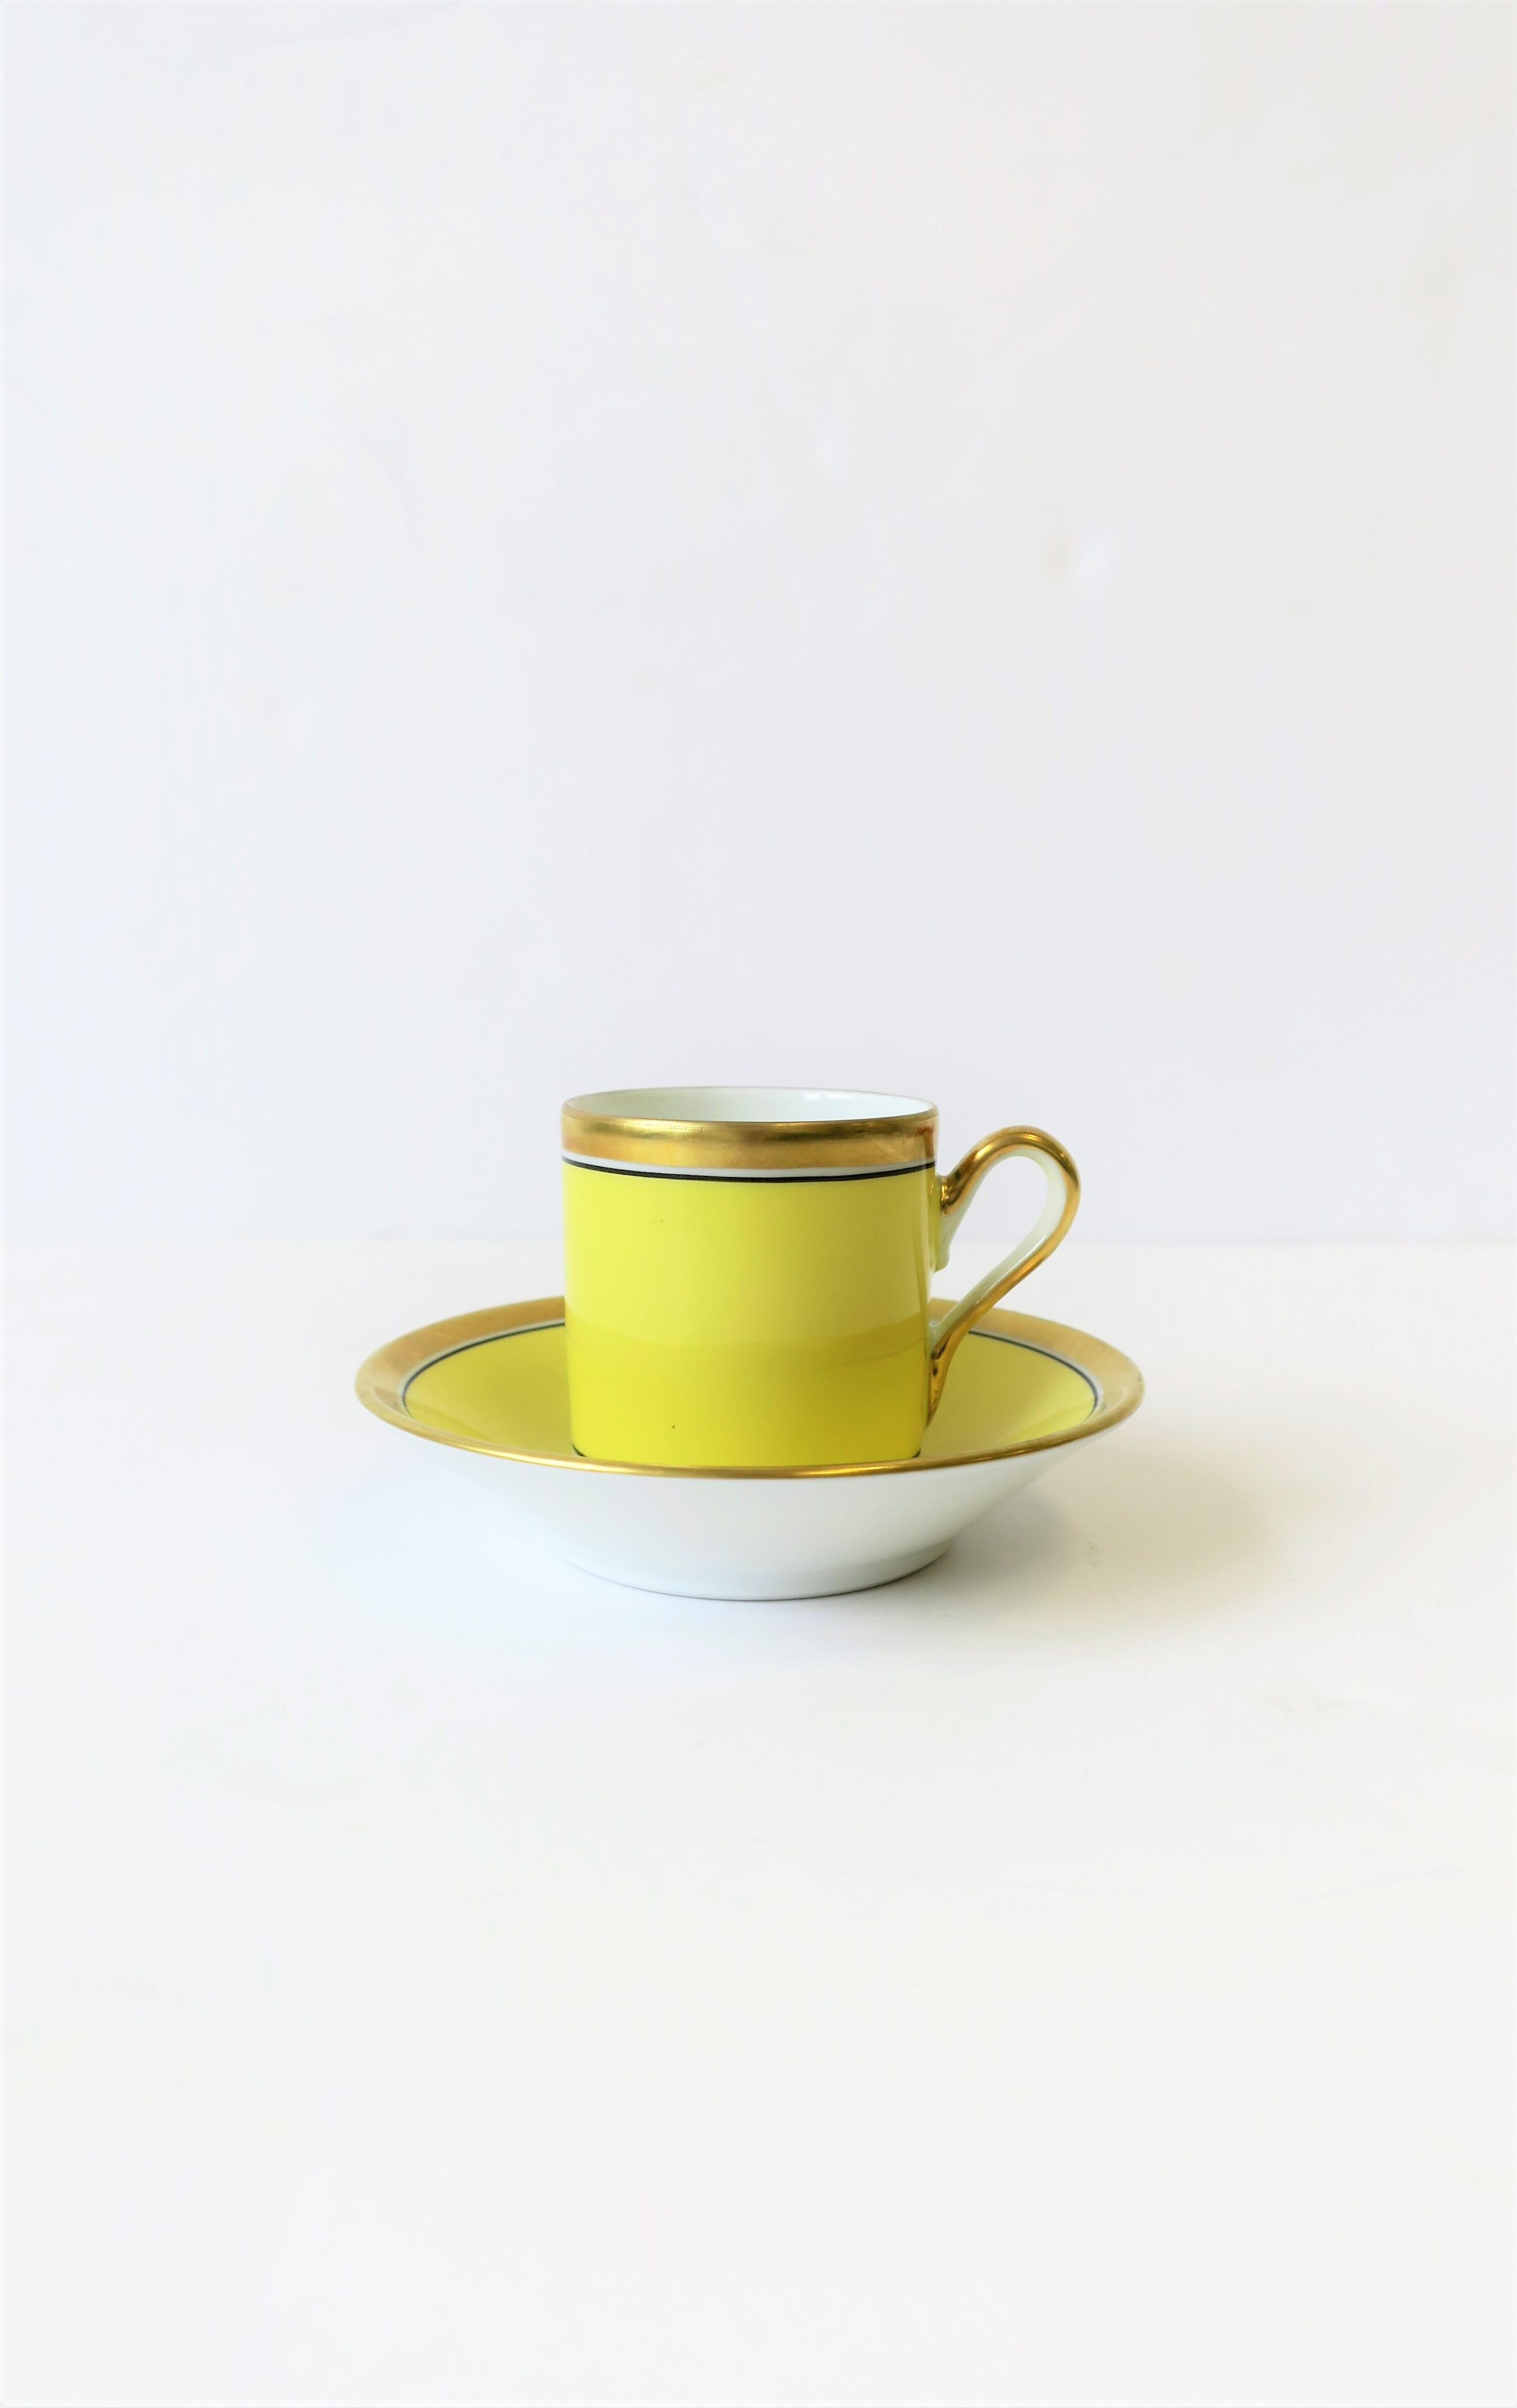 A beautiful yellow midcentury Italian espresso coffee or tea demitasse cup and saucer by designer Richard Ginori with decorative urn detail. Colors include: yellow, gold, white and black. With maker's mark on bottom as show in image #6. Set is in